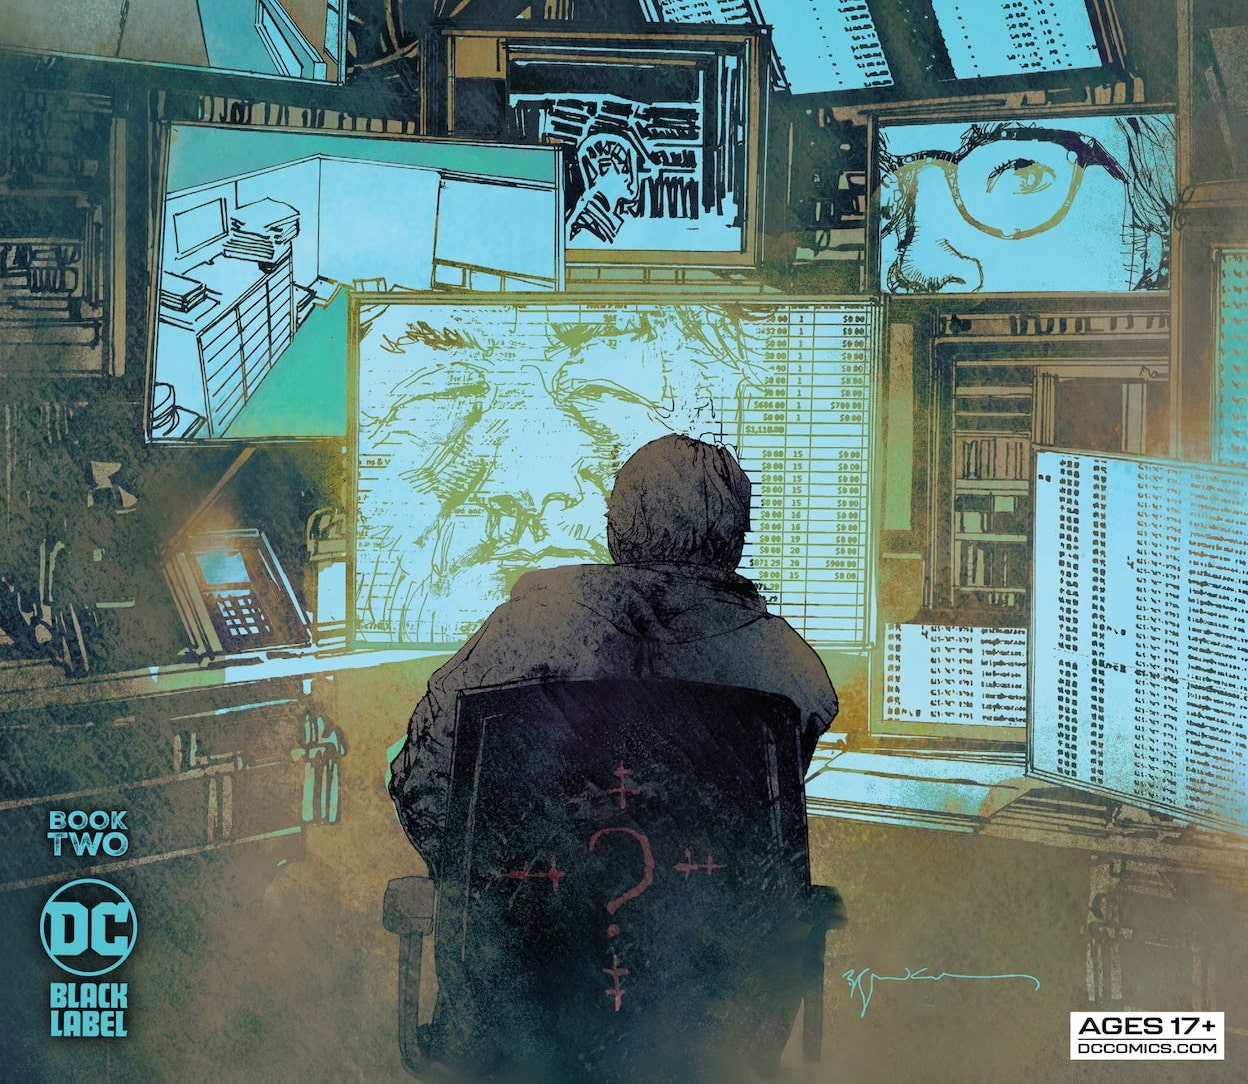 'The Riddler: Year One' #2 is a visual masterpiece